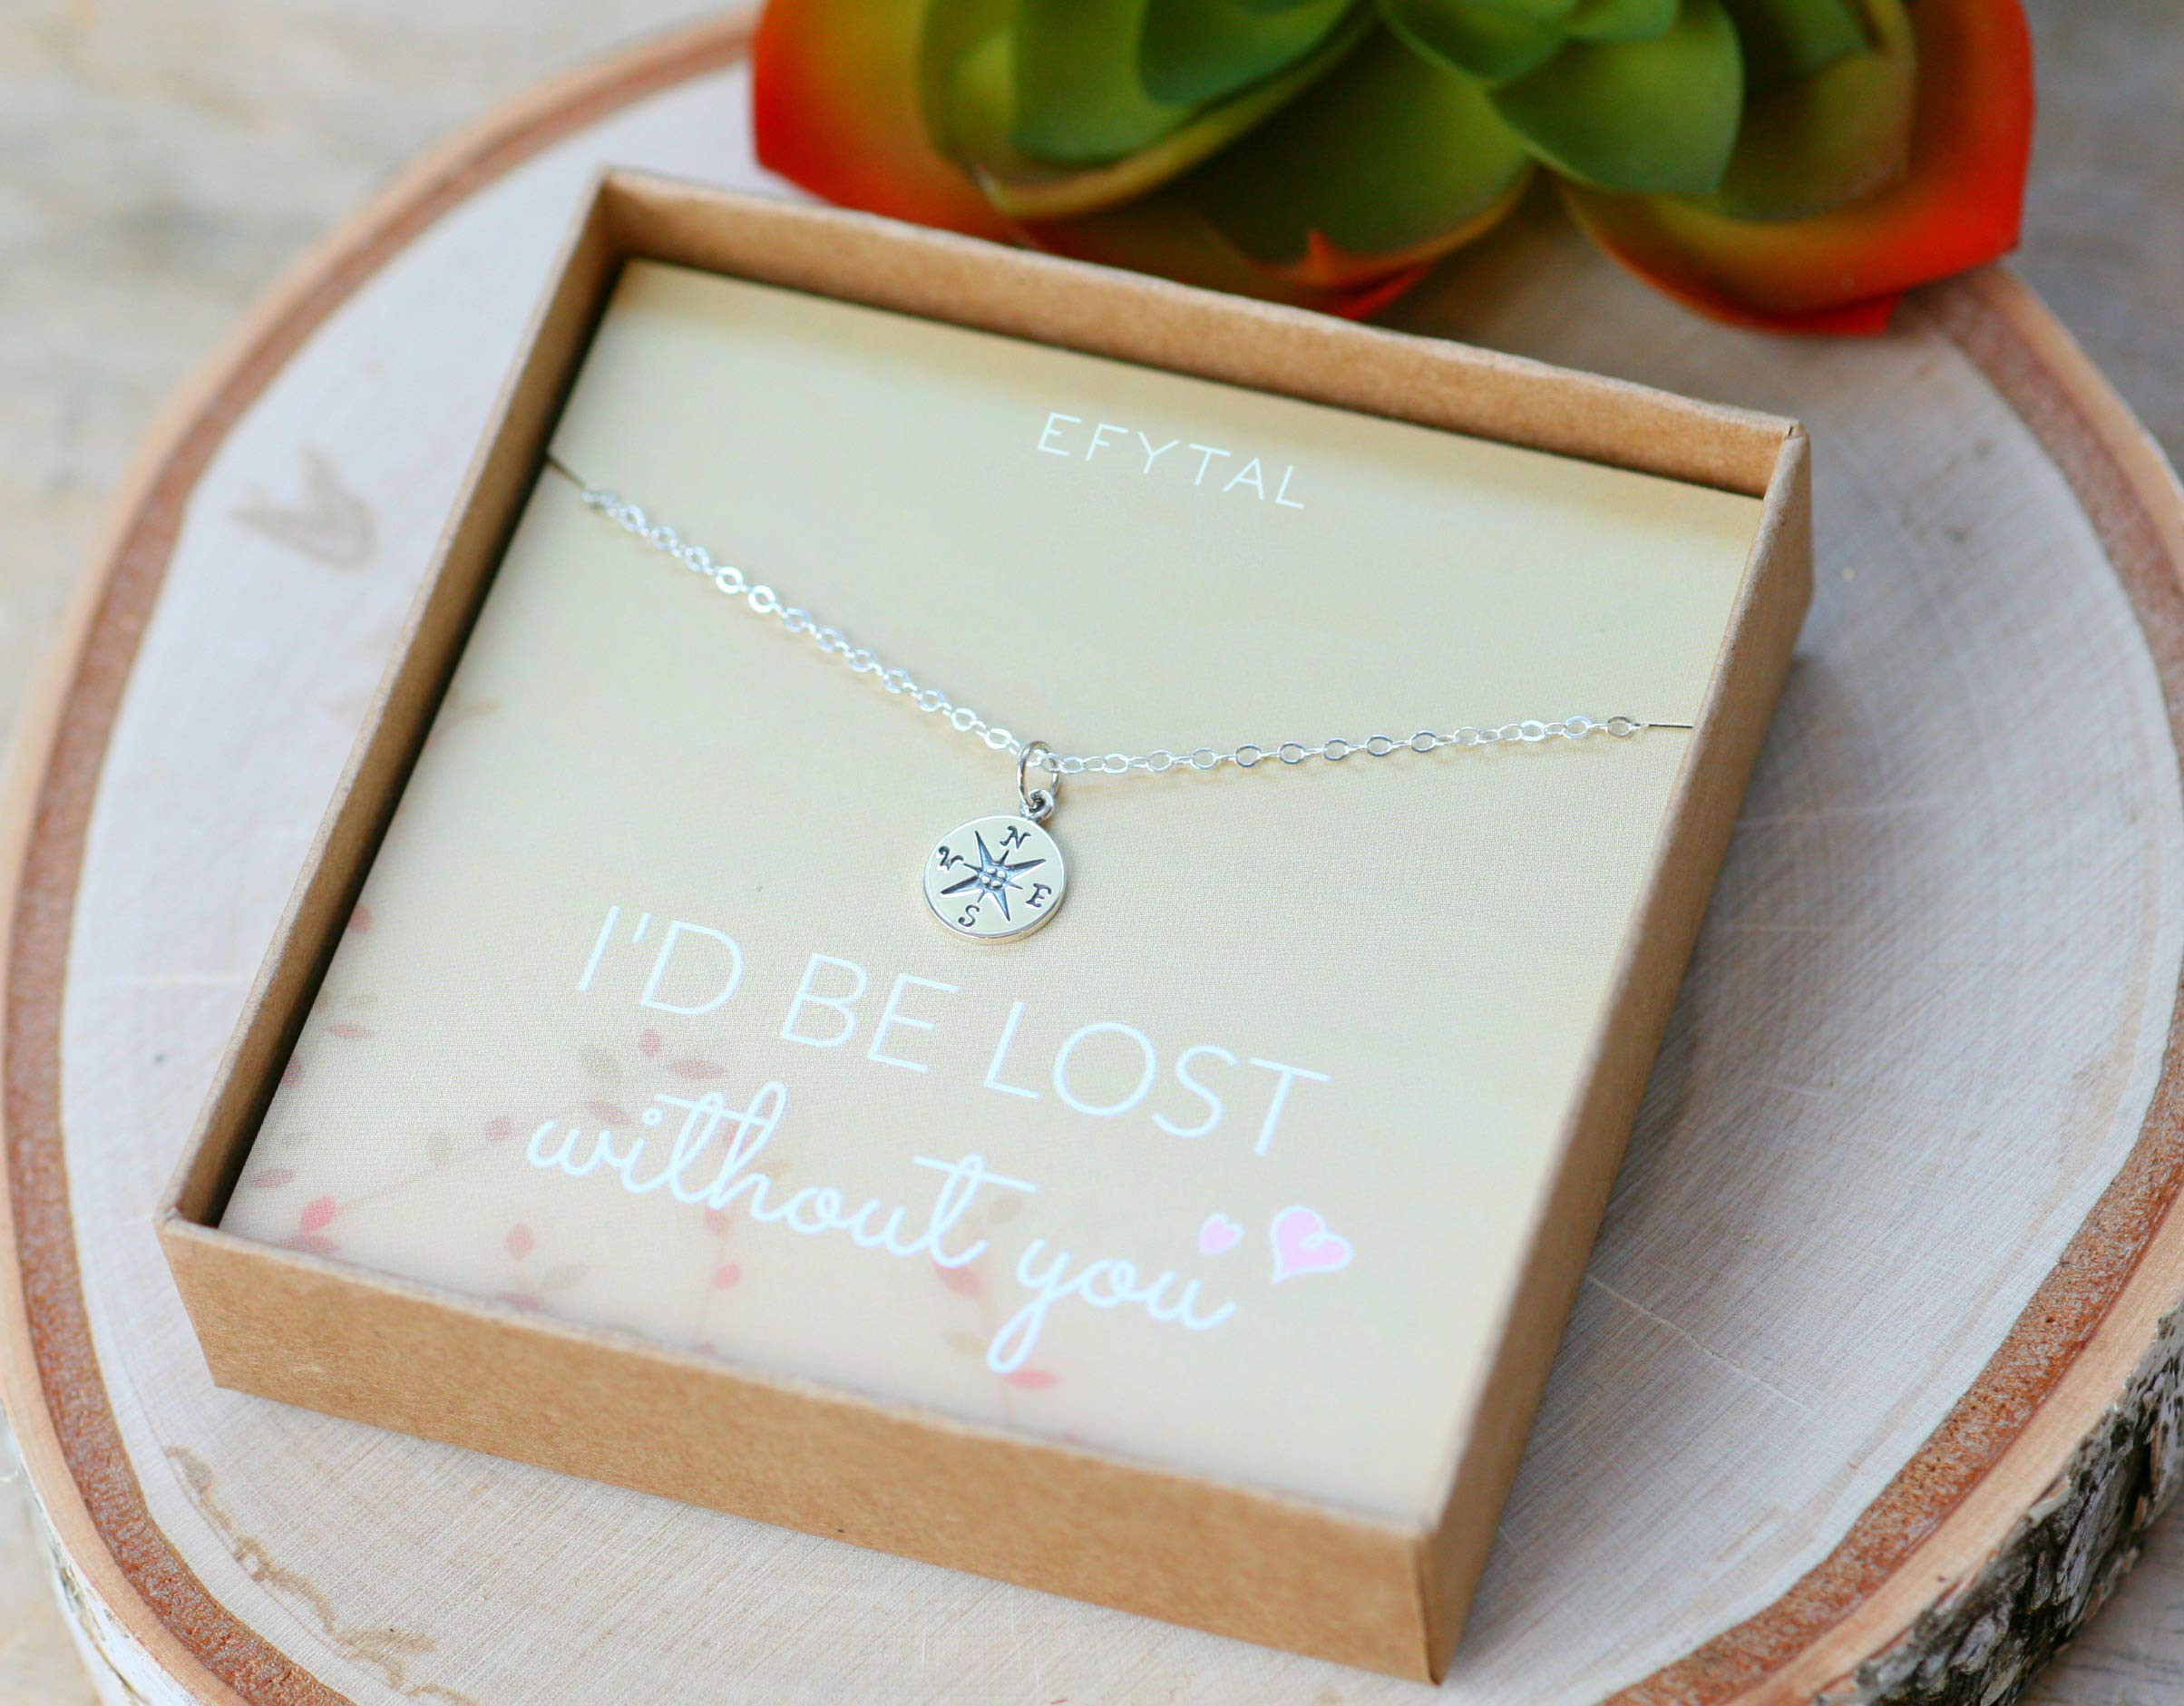 I Love You Gift Ideas For Girlfriend
 EFYTAL Necklace Gift for Girlfriend Wife Sterling